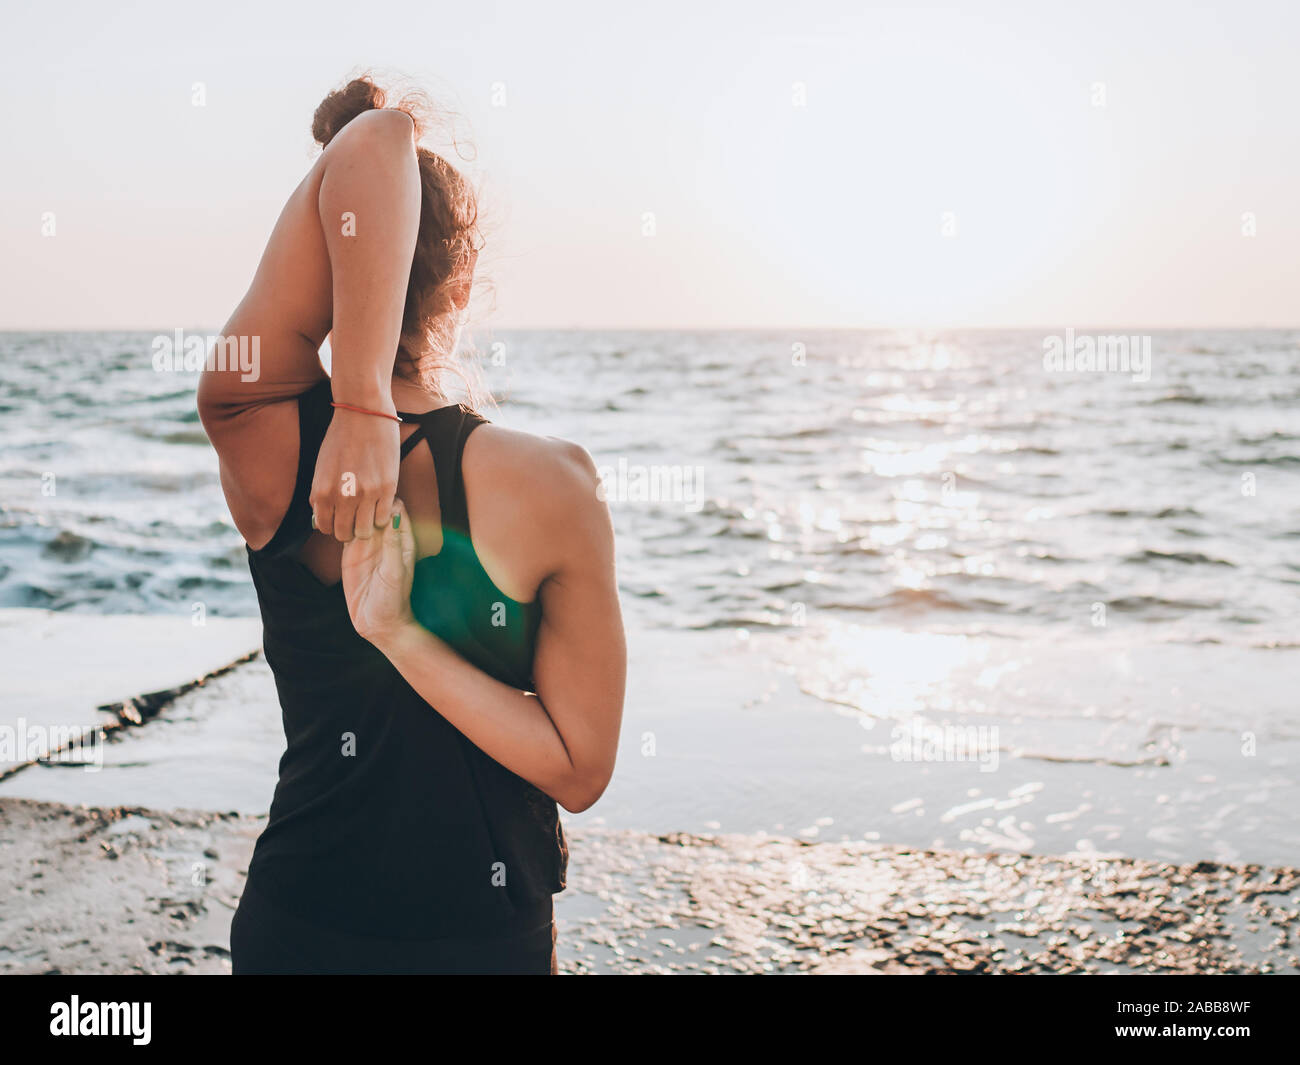 Slim woman in black bodysuit practicing yoga near sea or ocean during sunrise light. Flexibility, stretching, fitness, healthy lifestyle.  Stock Photo